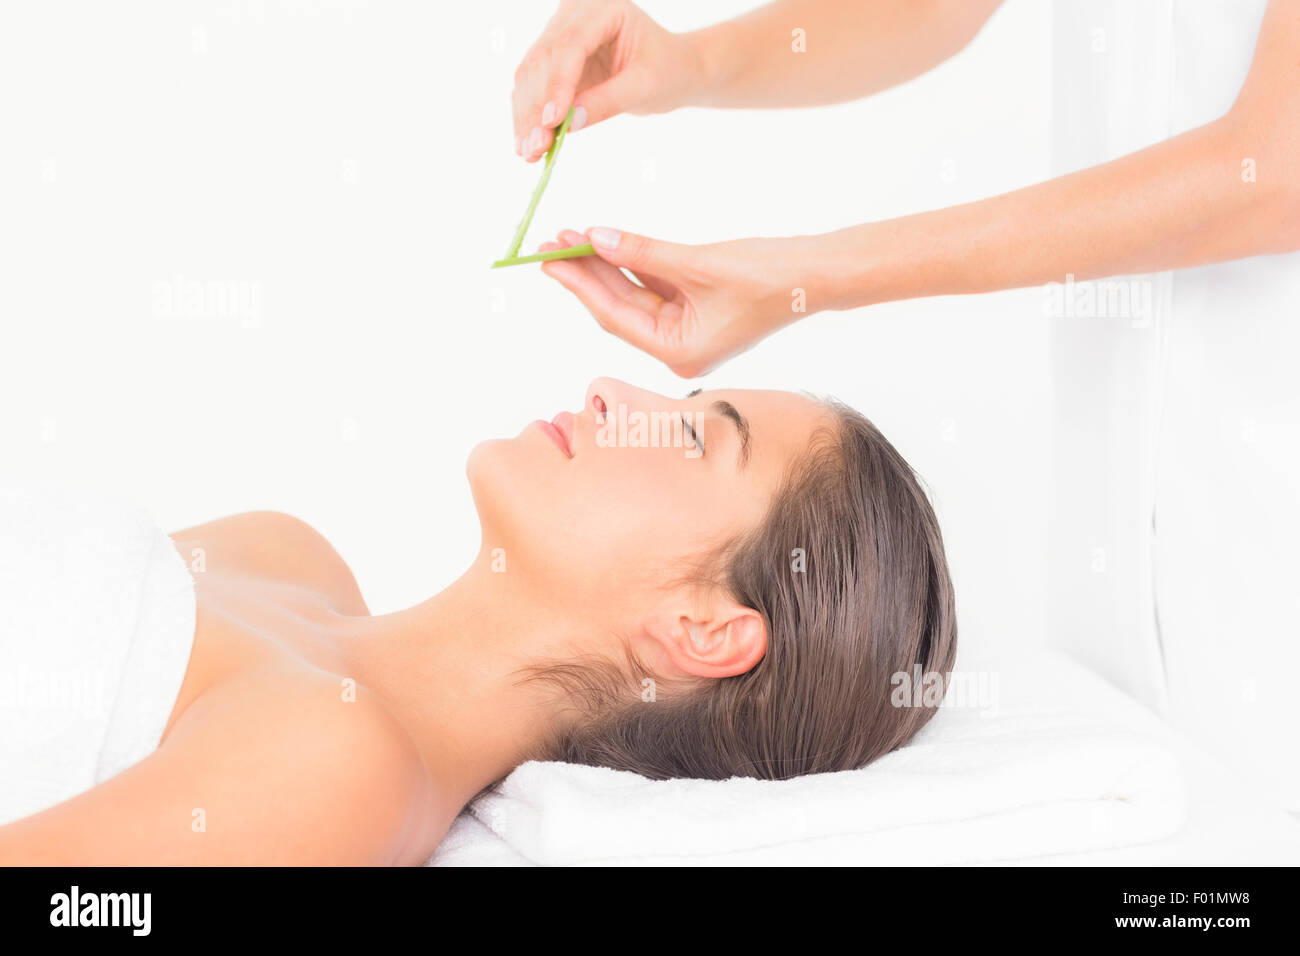 woman who practice natural medicine Stock Photo